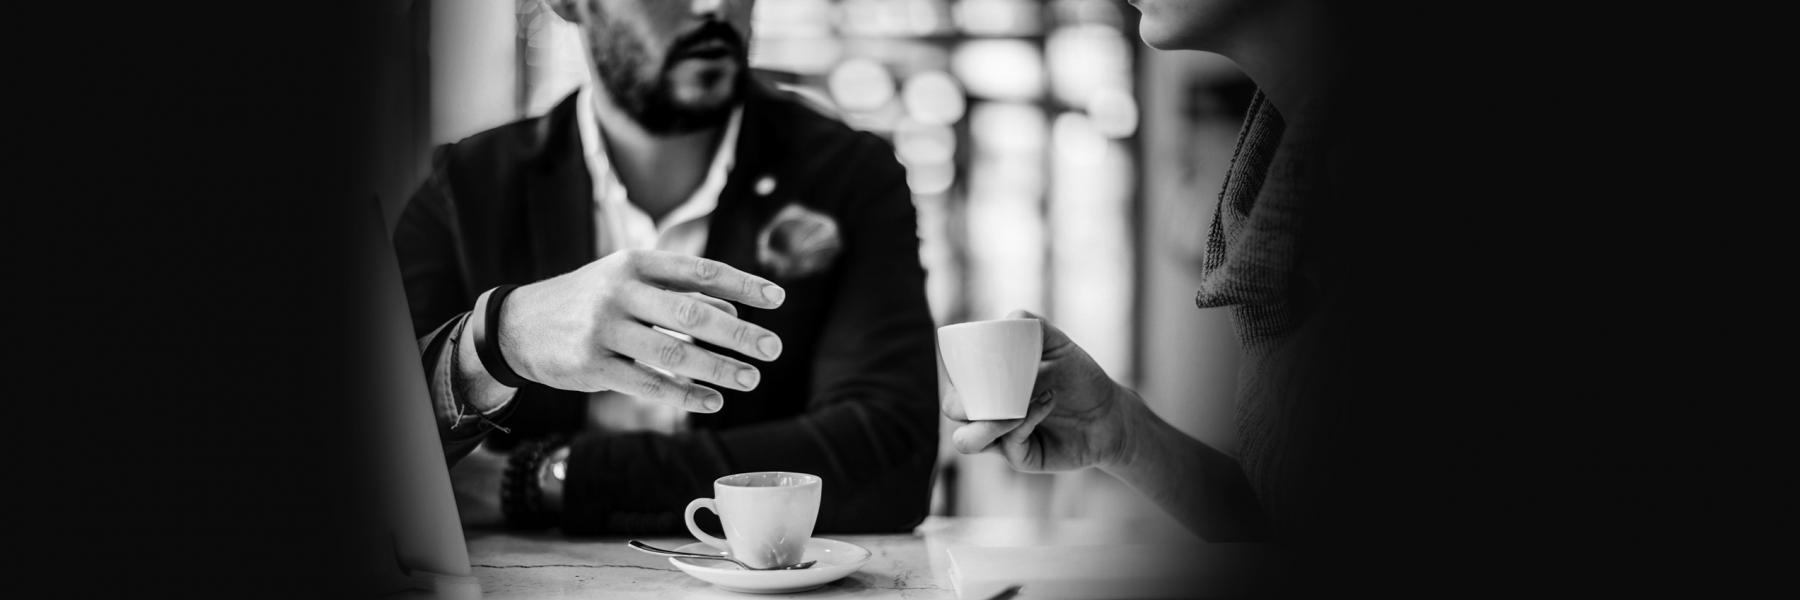 An image of a business meeting over coffee